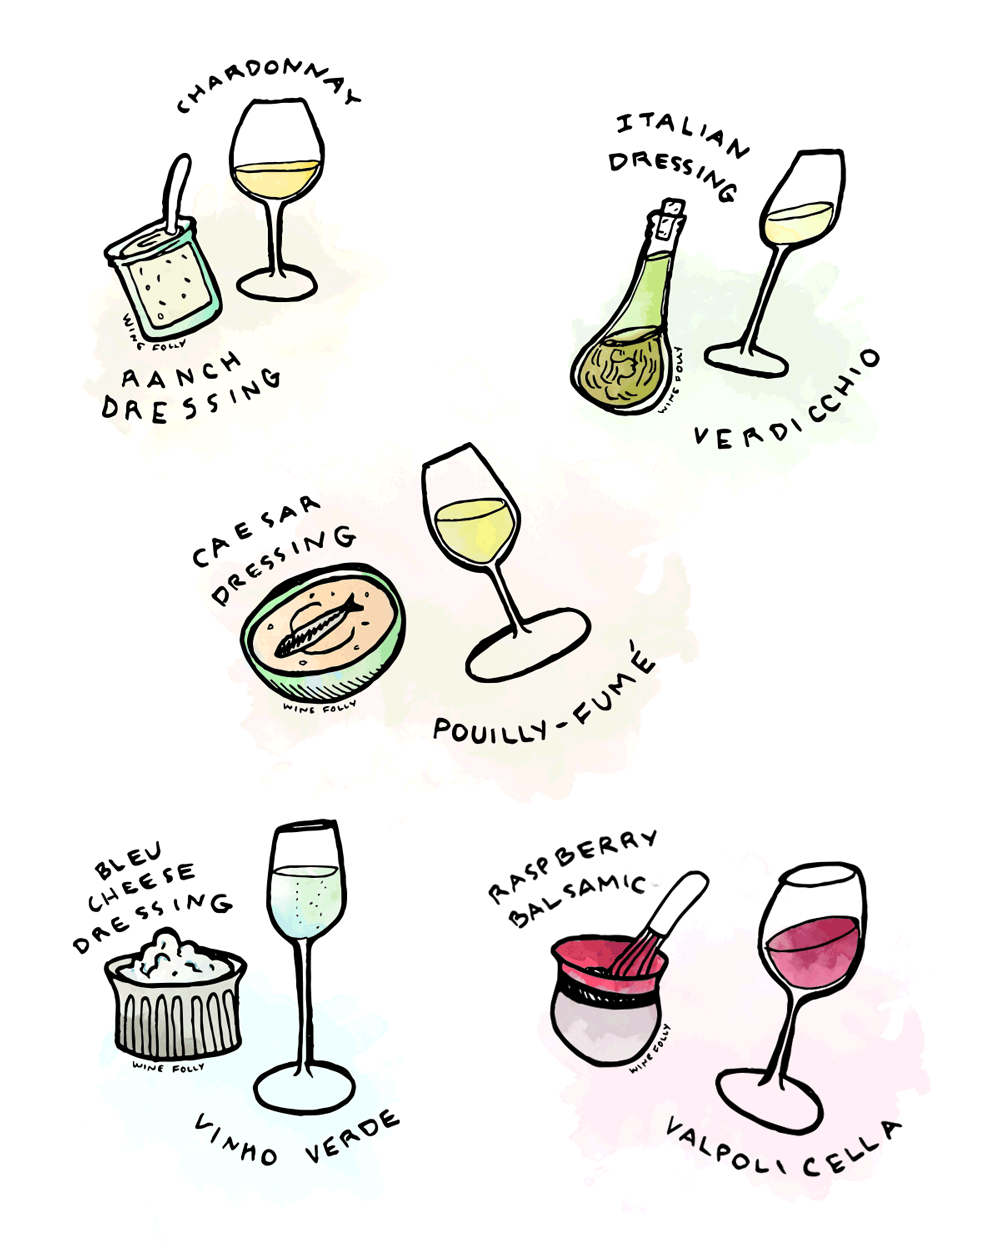 Wine with Salad Food Pairing - it's all about the dressing